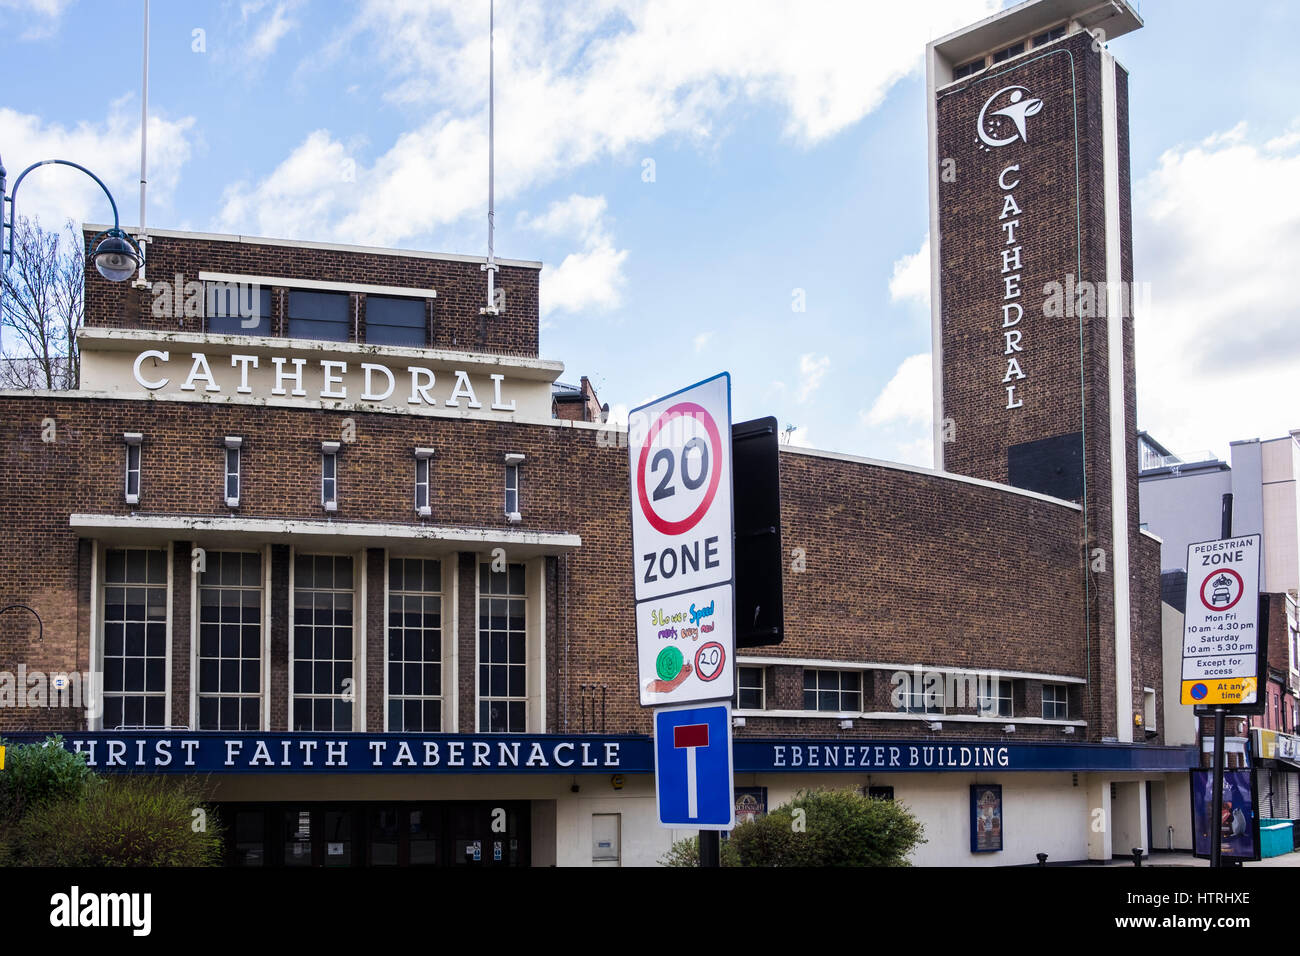 Christ Tabernacle Cathédrale, Woolwich, Londres, Angleterre, Royaume-Uni Banque D'Images